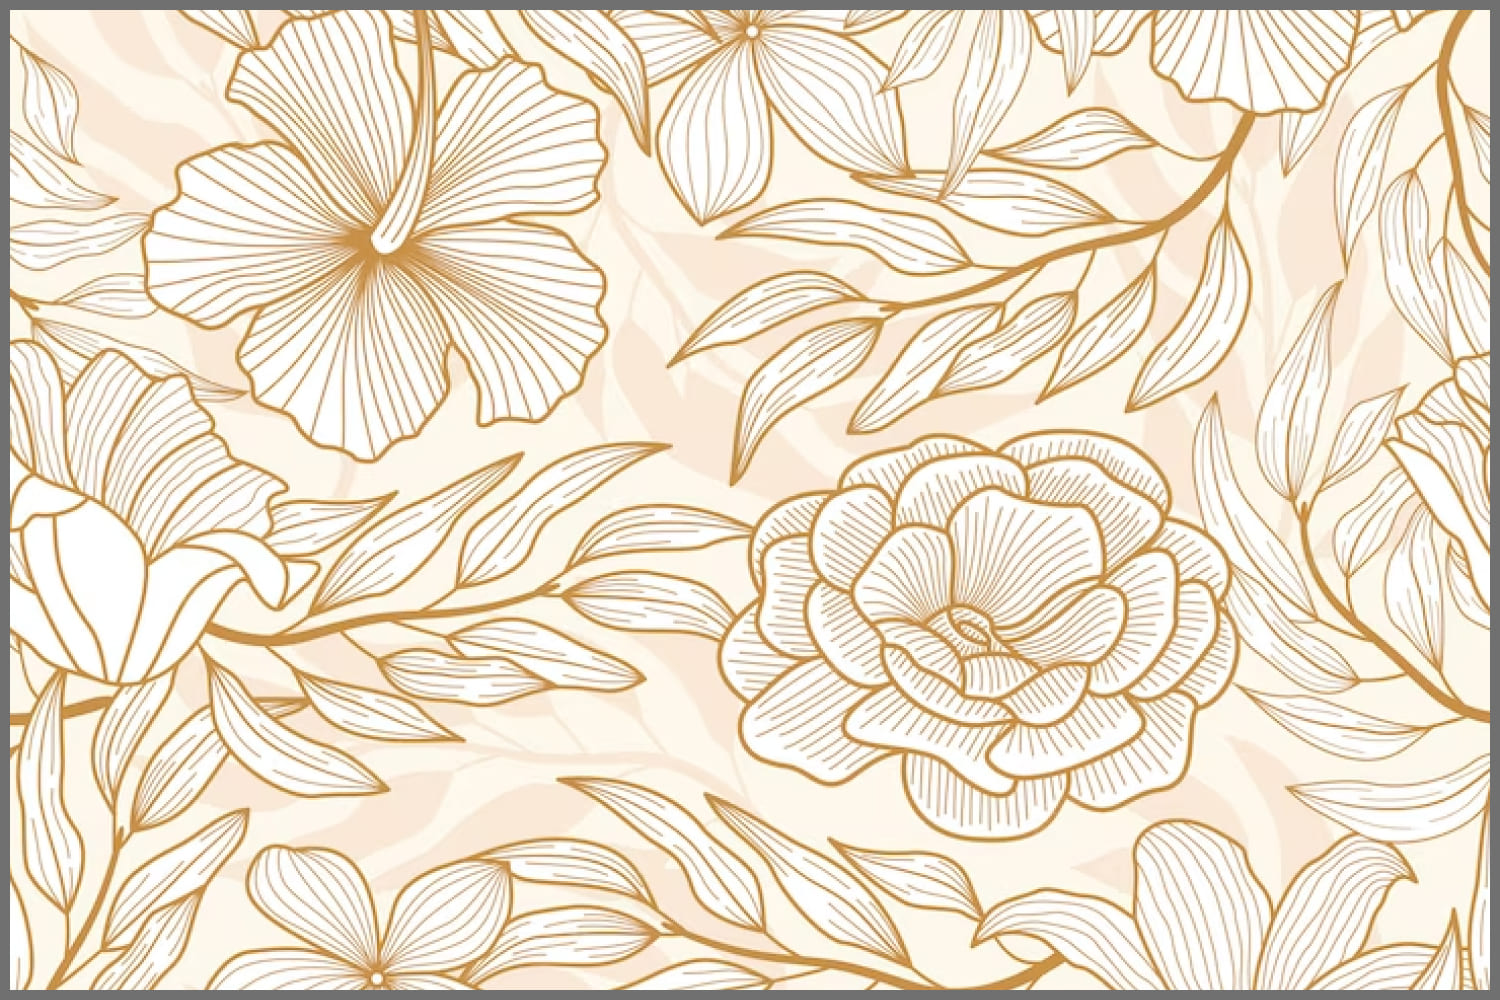 Seamless vintage flower background pattern with neat hand-drawn details.